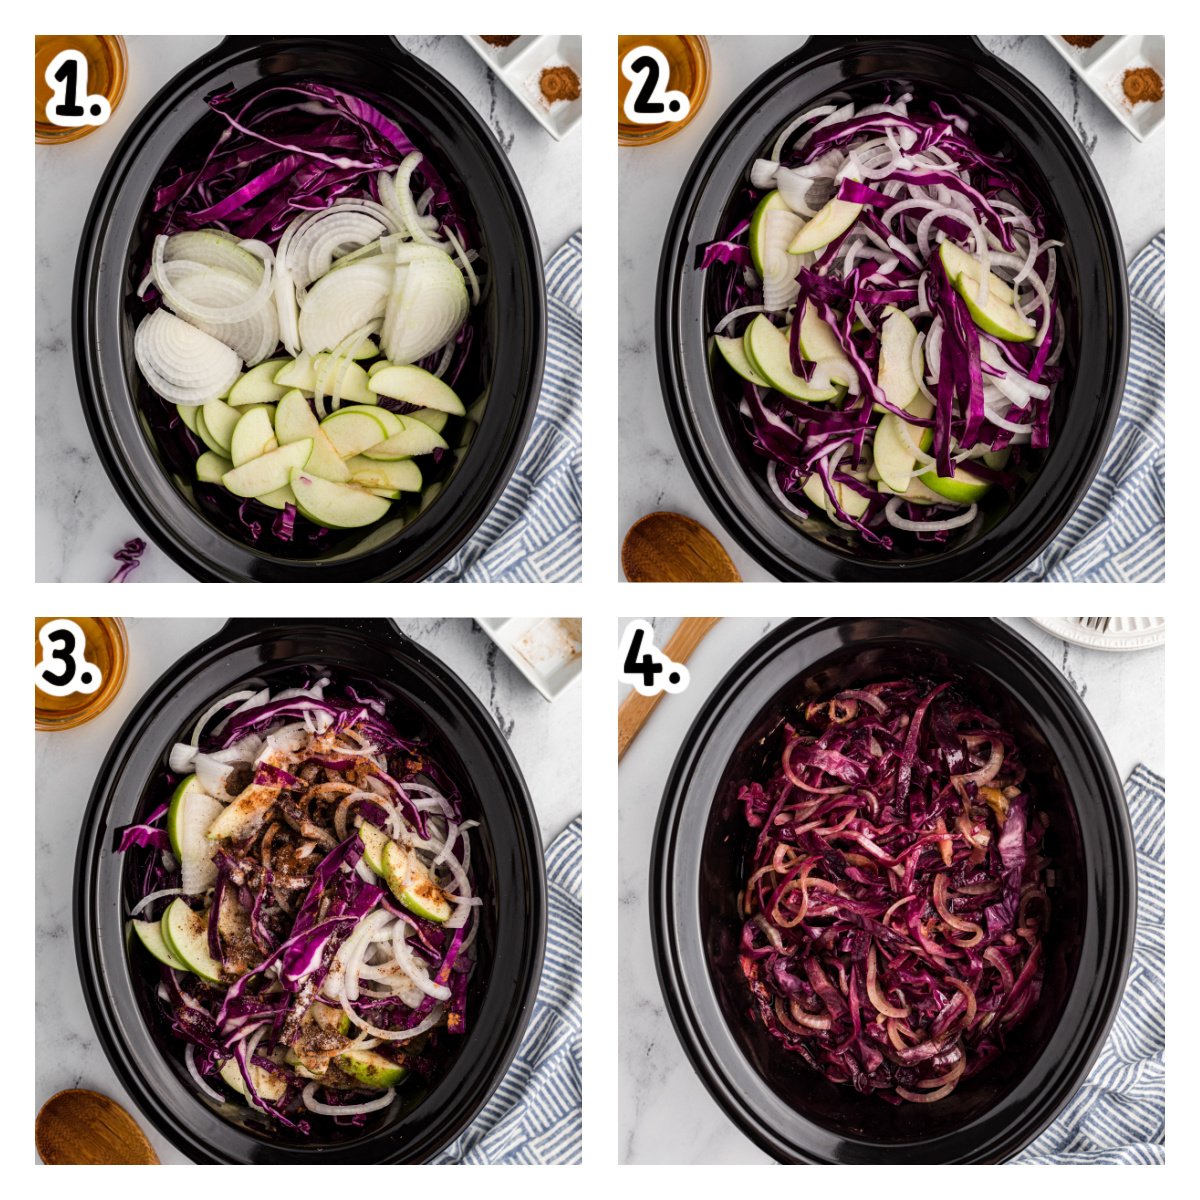 4 images showing how to make red cabbage in a slow cooker.